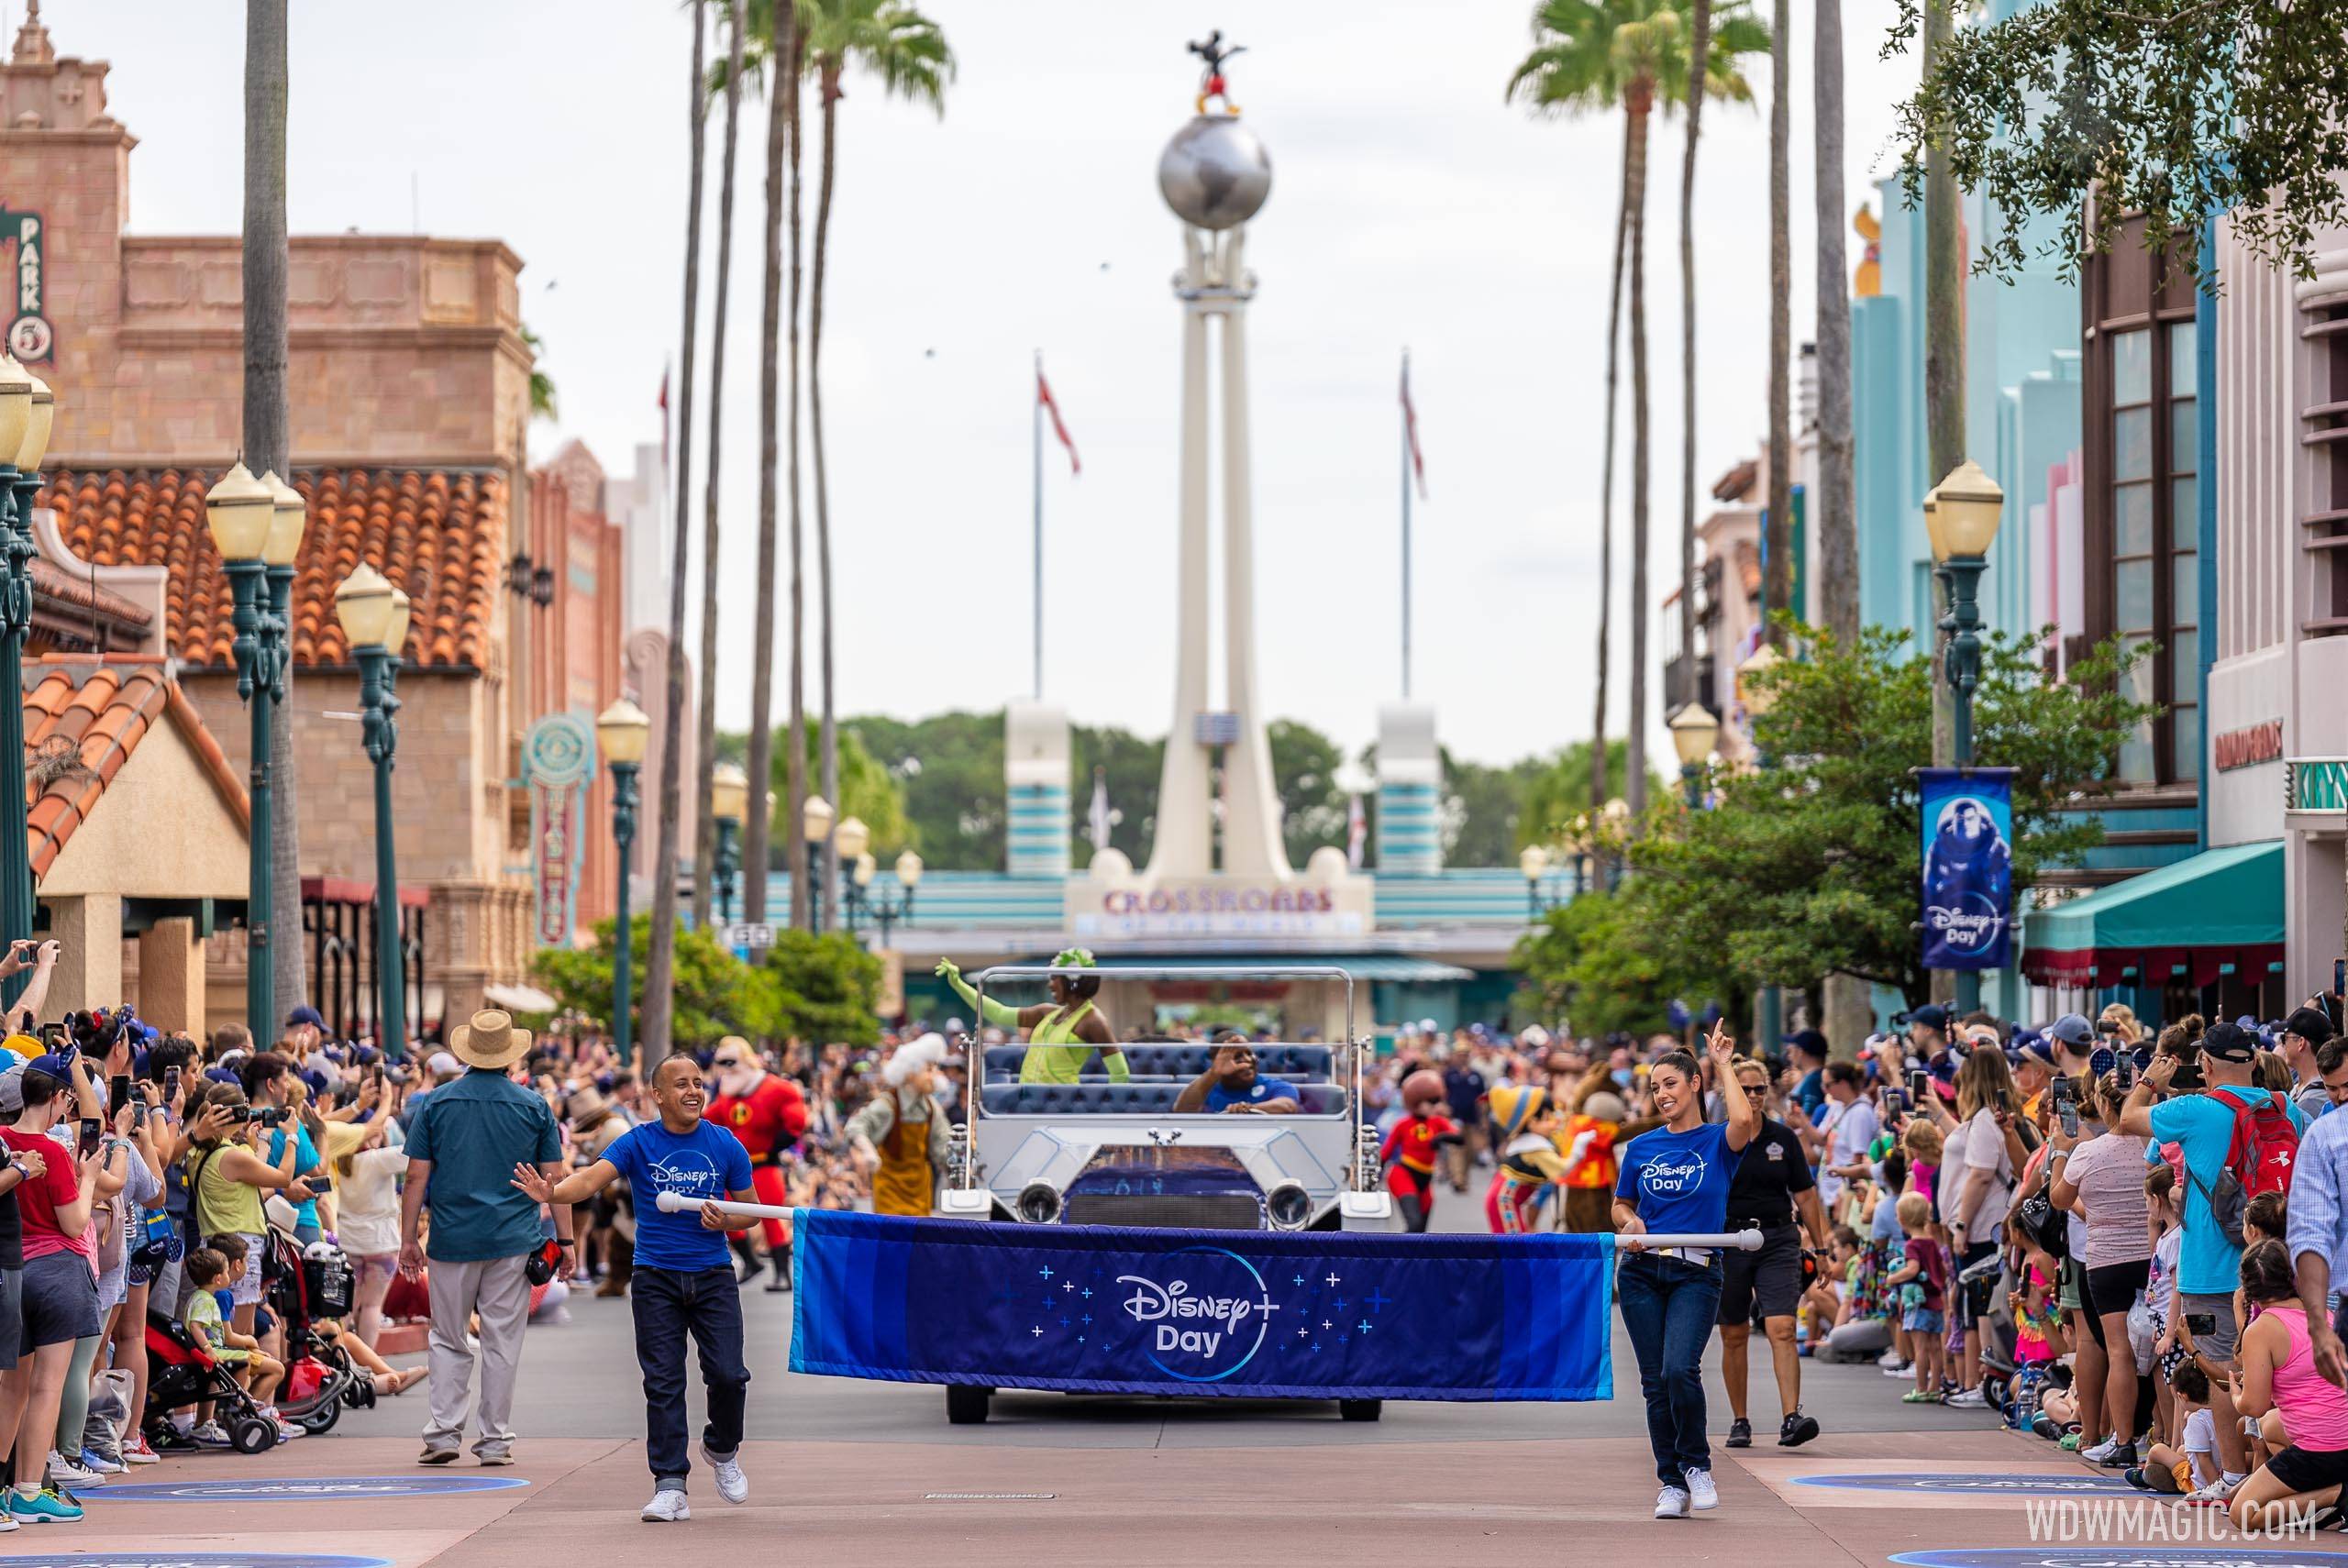 Disney+ Day motorcade takes to the streets of Disney's Hollywood Studios with Mickey & Minnie, Tiana, Mirabel, Rescue Rangers, Pinocchio, and Pixar Pals